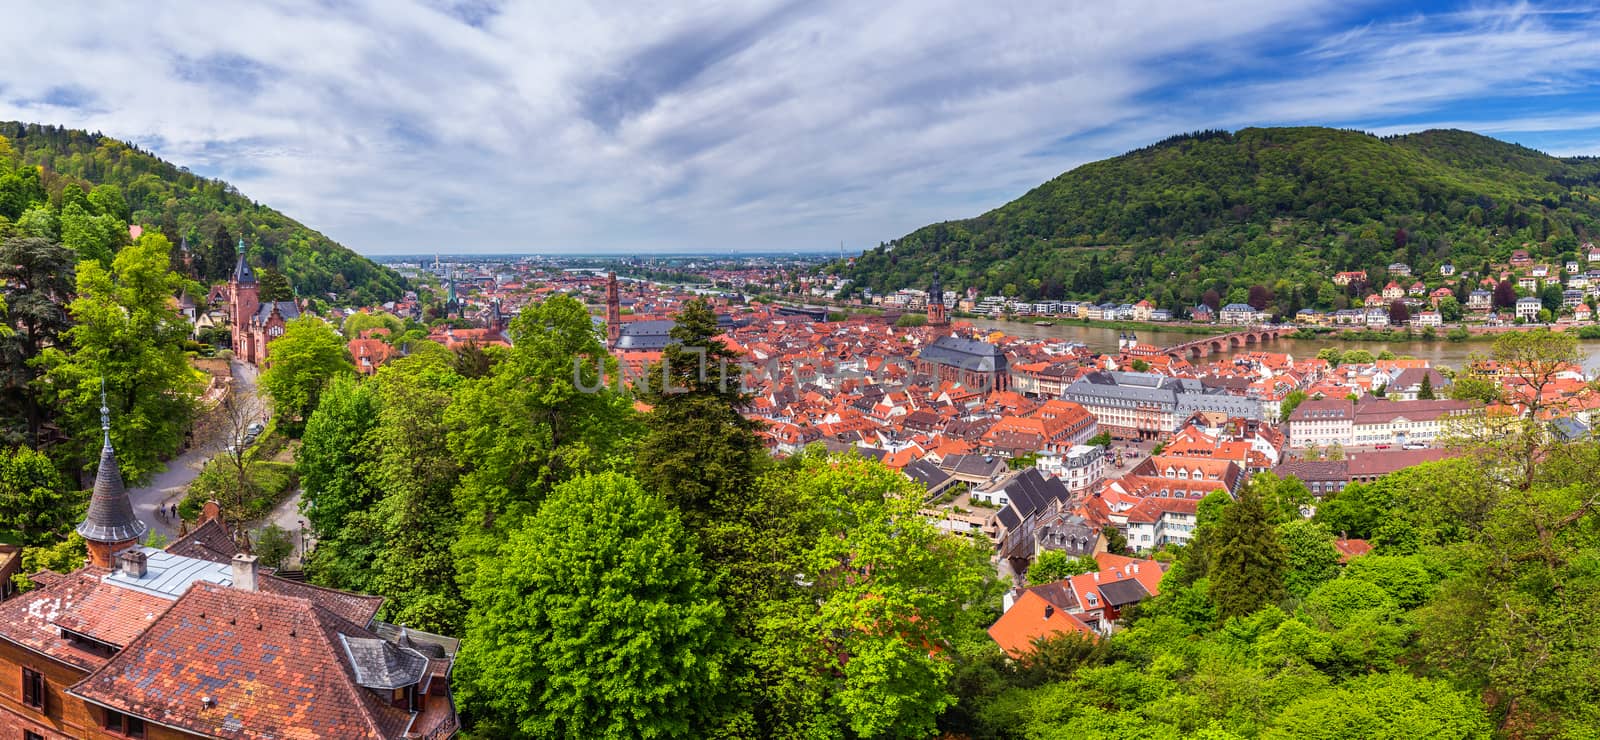 Panoramic view of beautiful medieval town Heidelberg including C by DaLiu